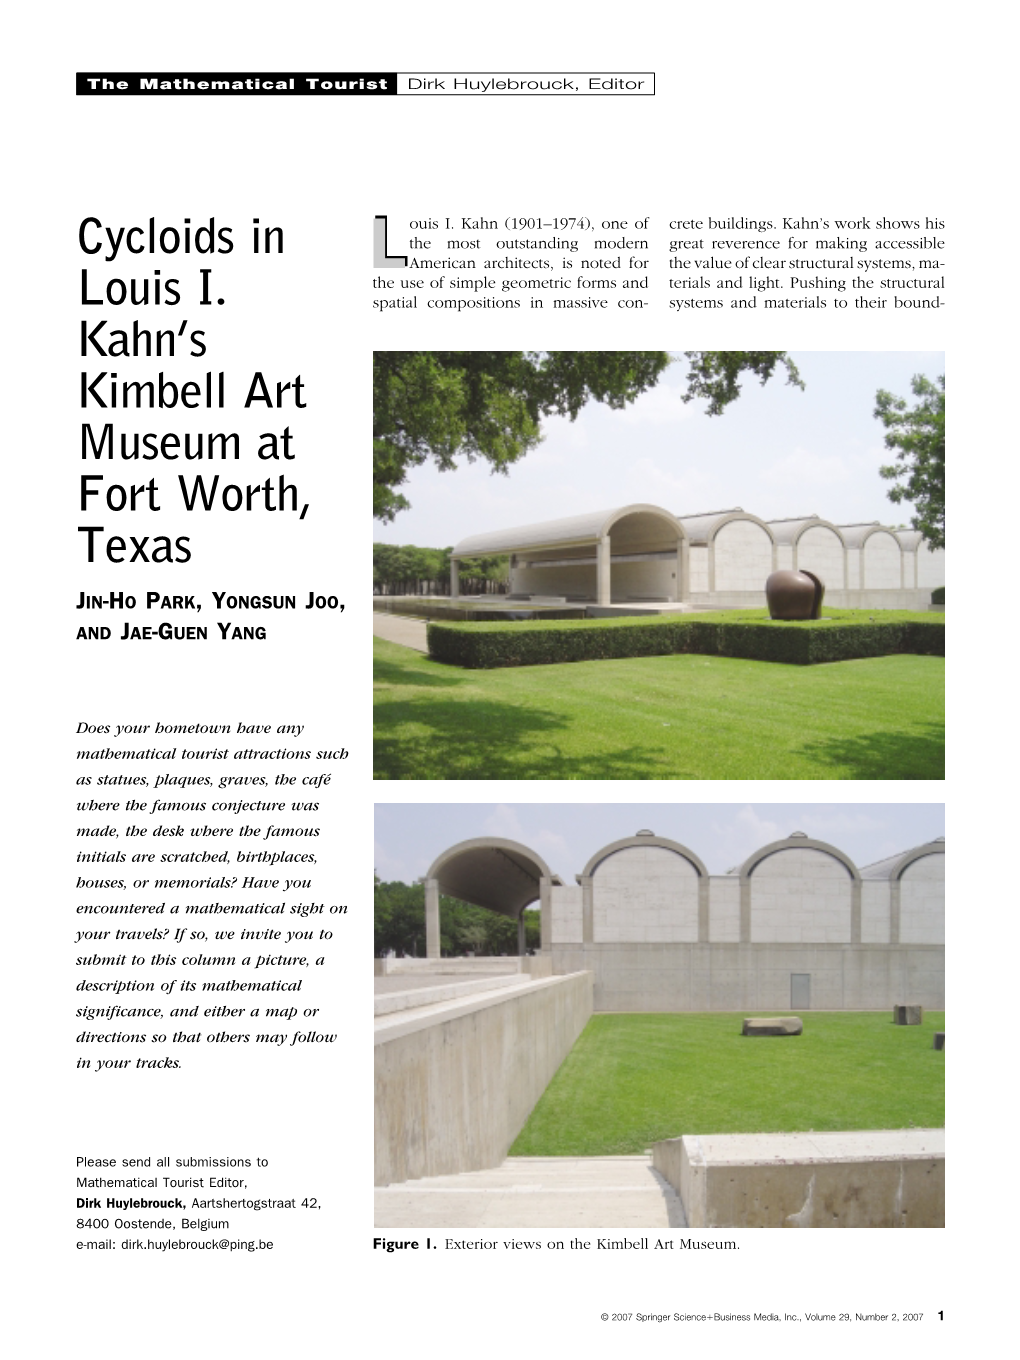 Cycloids in Louis I. Kahn's Kimbell Art Museum at Fort Worth, Texas